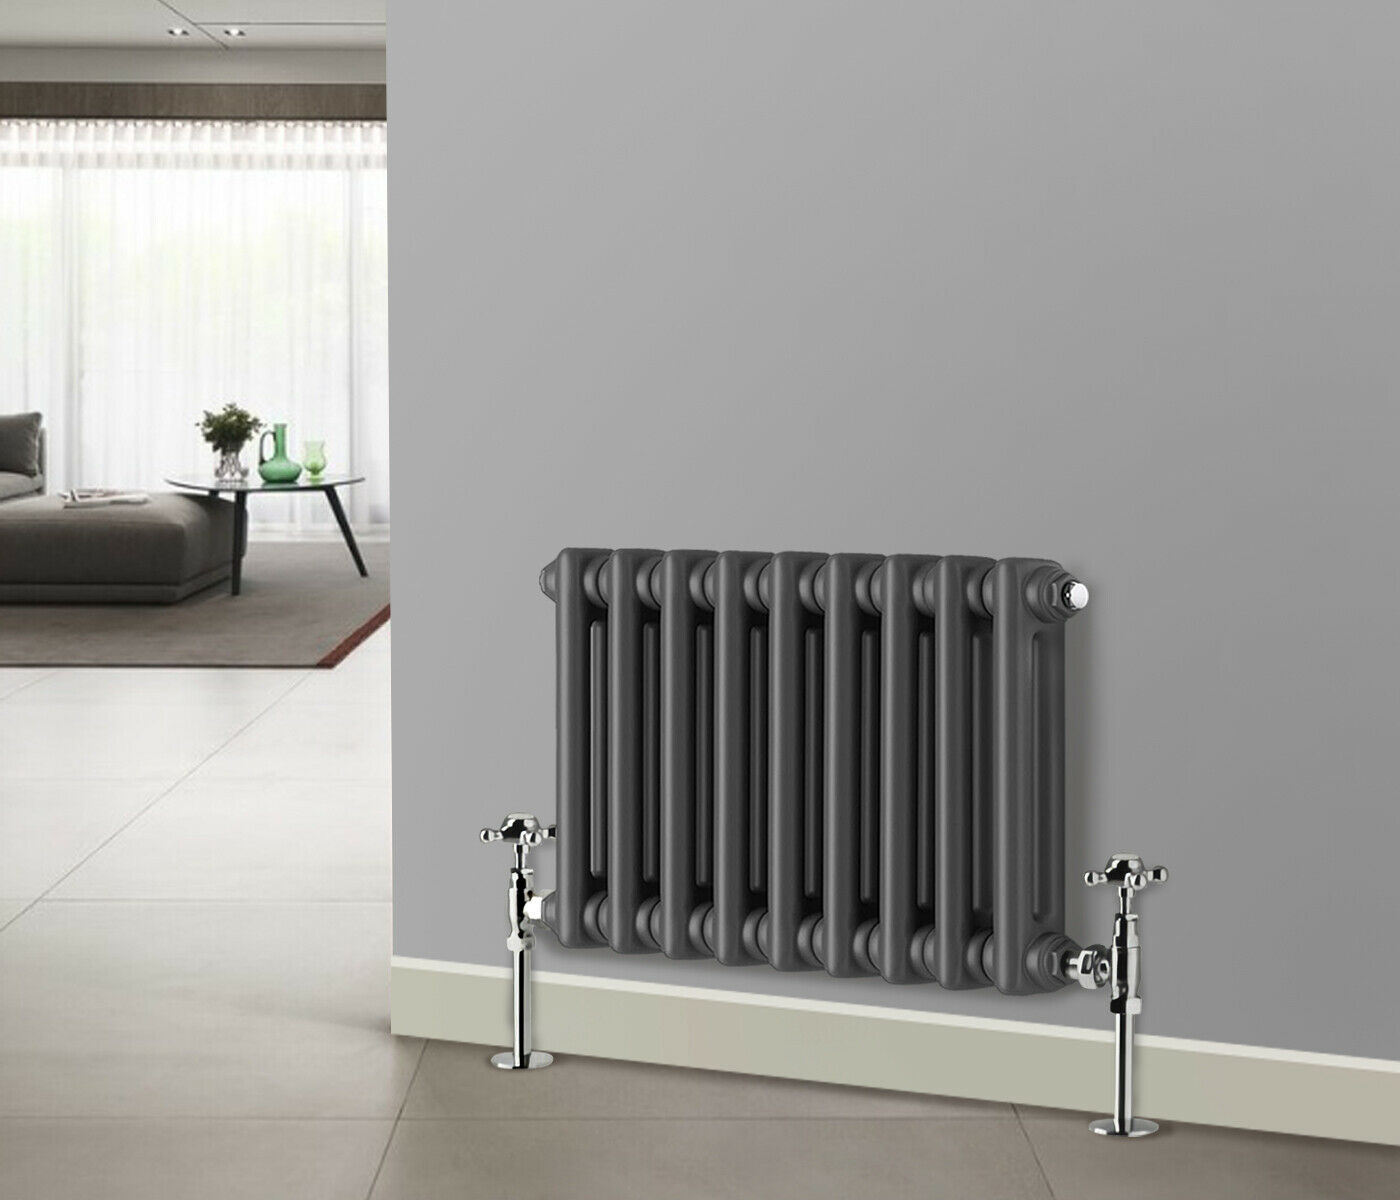 Heater radiator knowledge 3 - the price of different types of home radiators